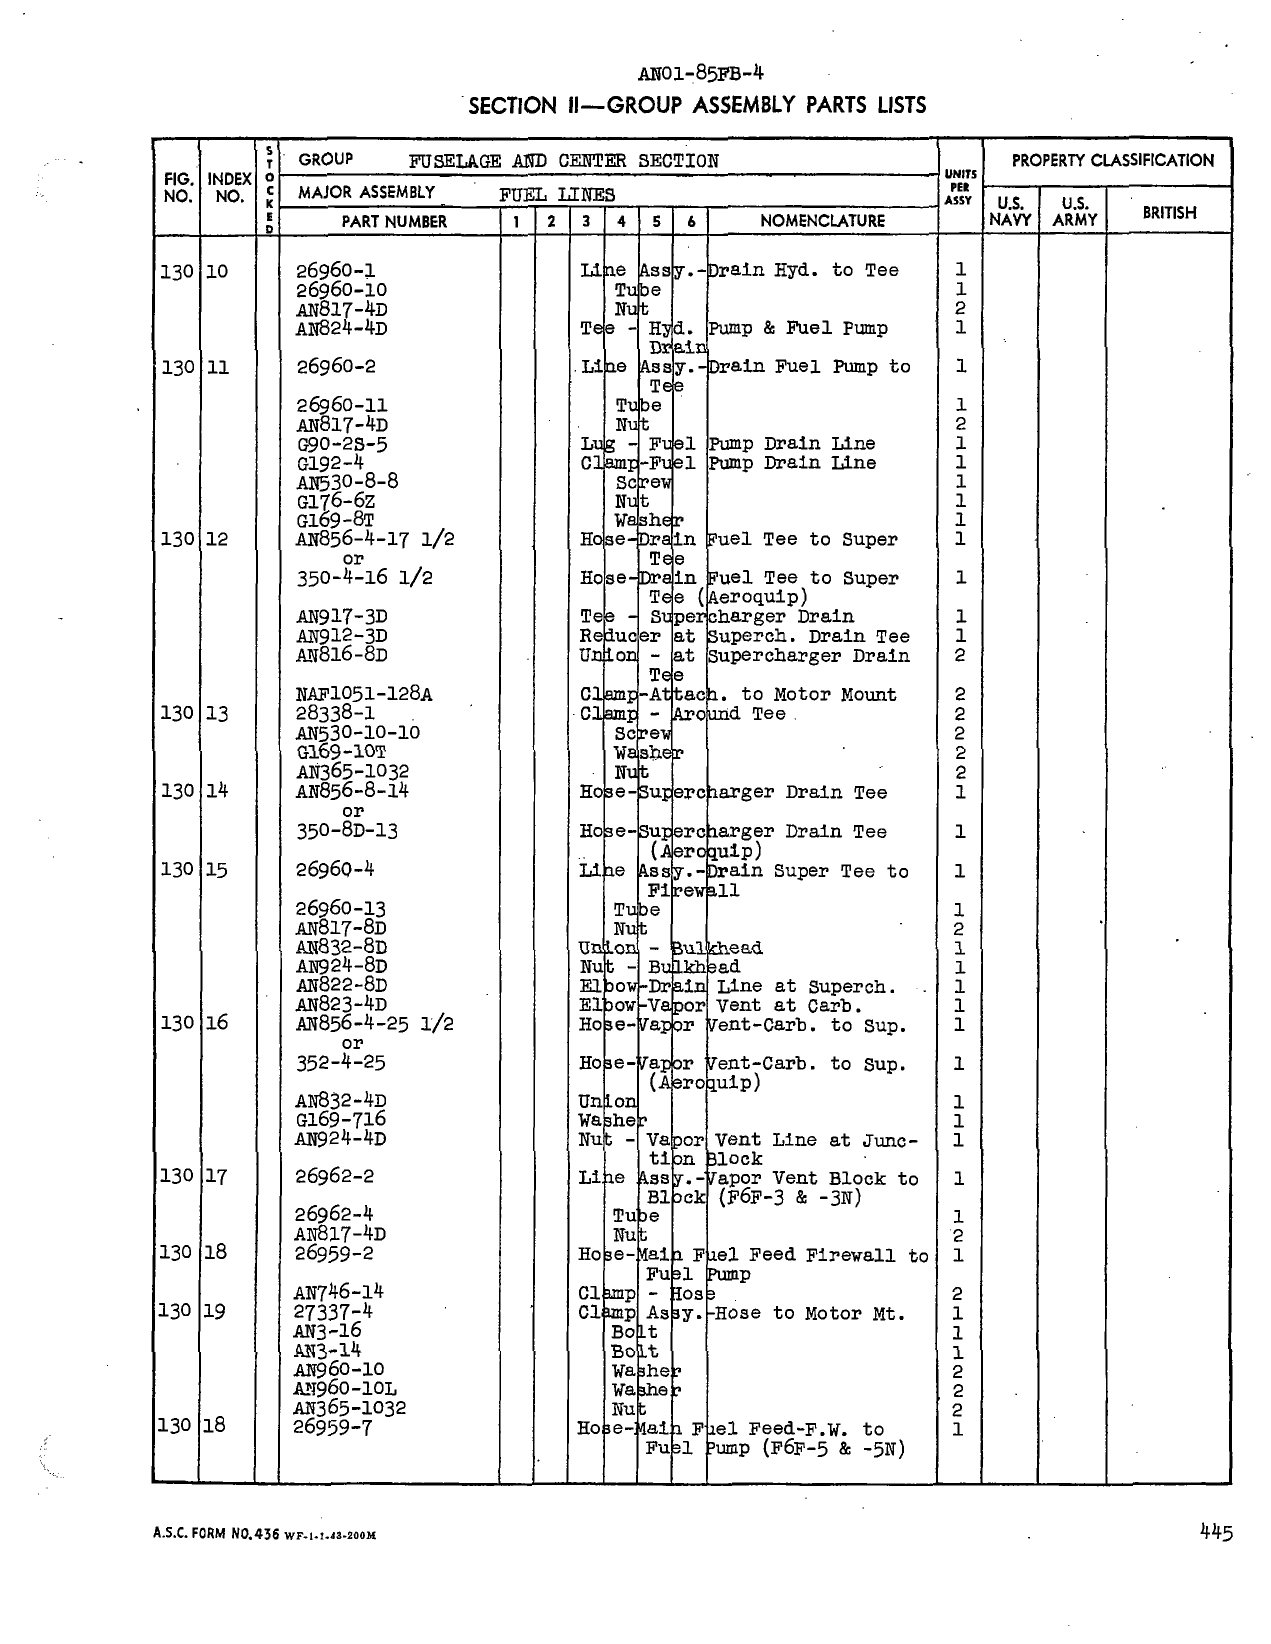 Sample page 449 from AirCorps Library document: Parts Catalog - F6F-3, F6F-5